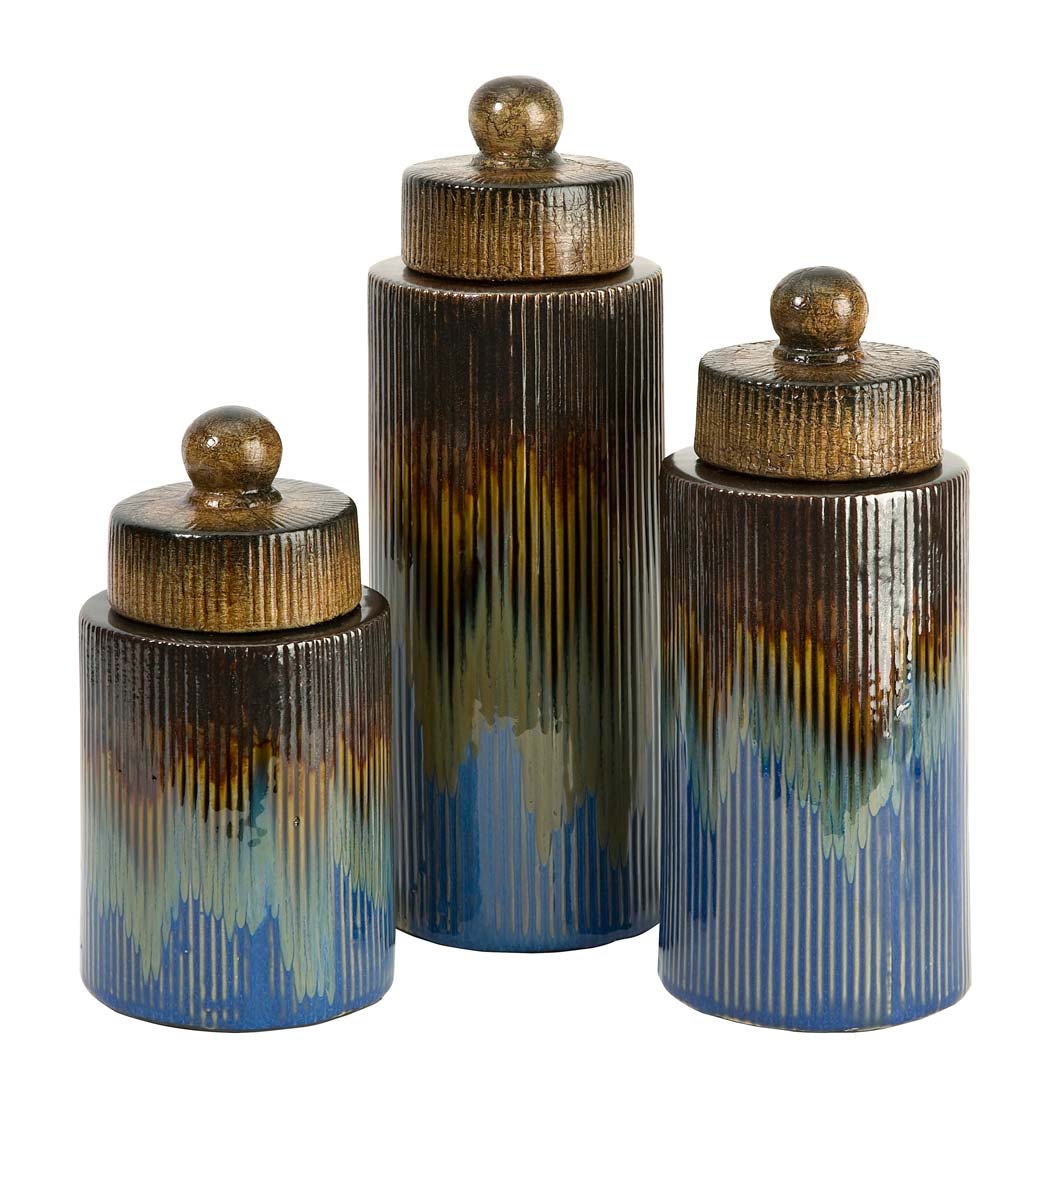 IMAX Frazier Ceramic Canisters - Set of 3